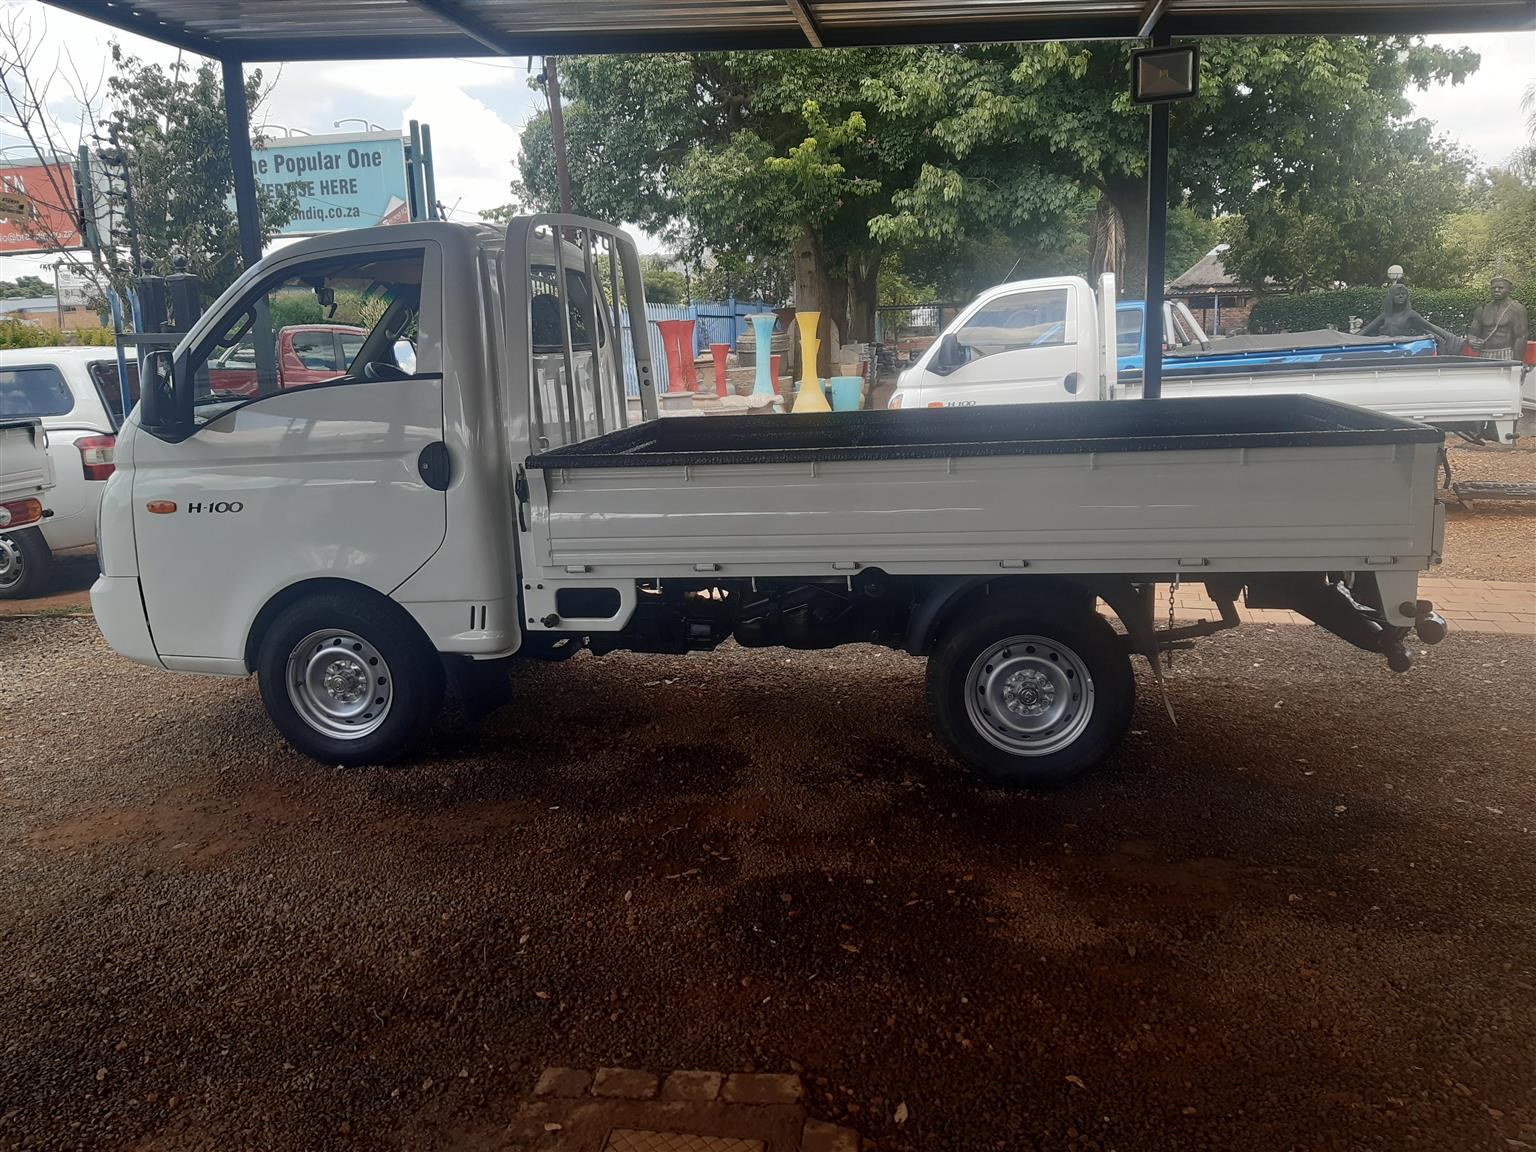 Bakkie for hire and removals, Pretoria area and surroundings